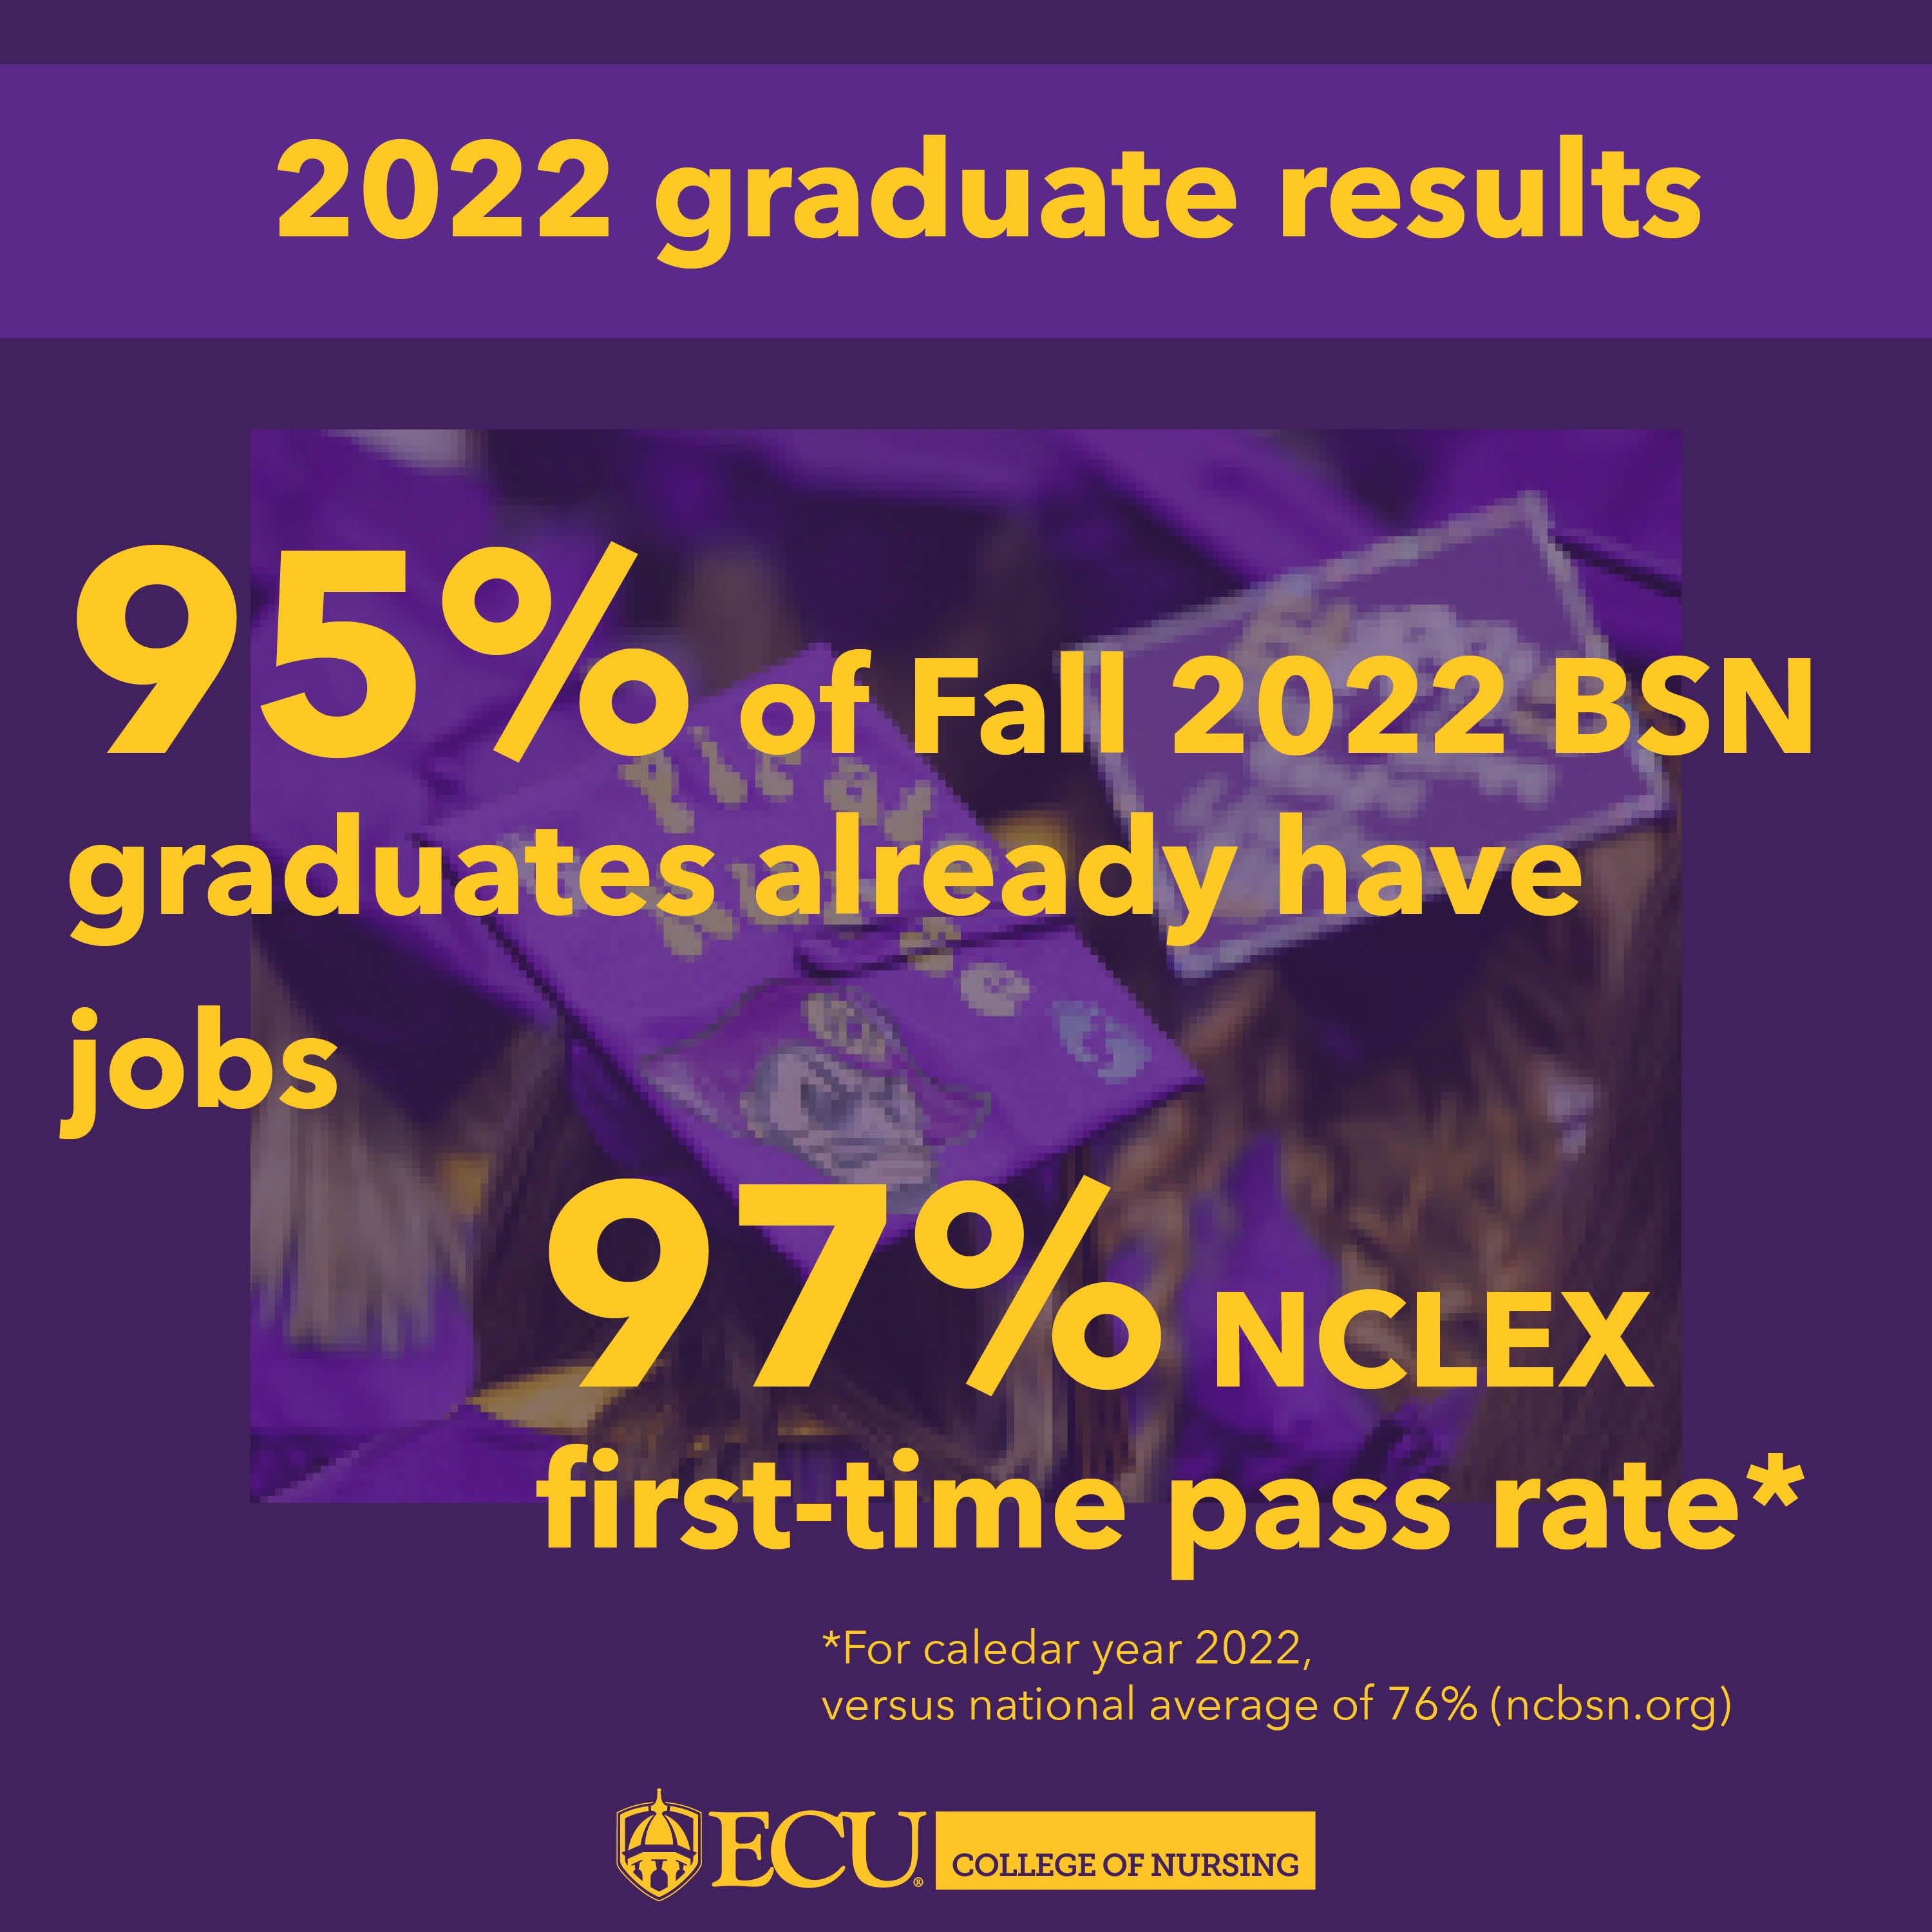 CON Fall 2022 graduation results, 95% of BSN graduates already have jobs, 97% NCLEX first-time pass rate